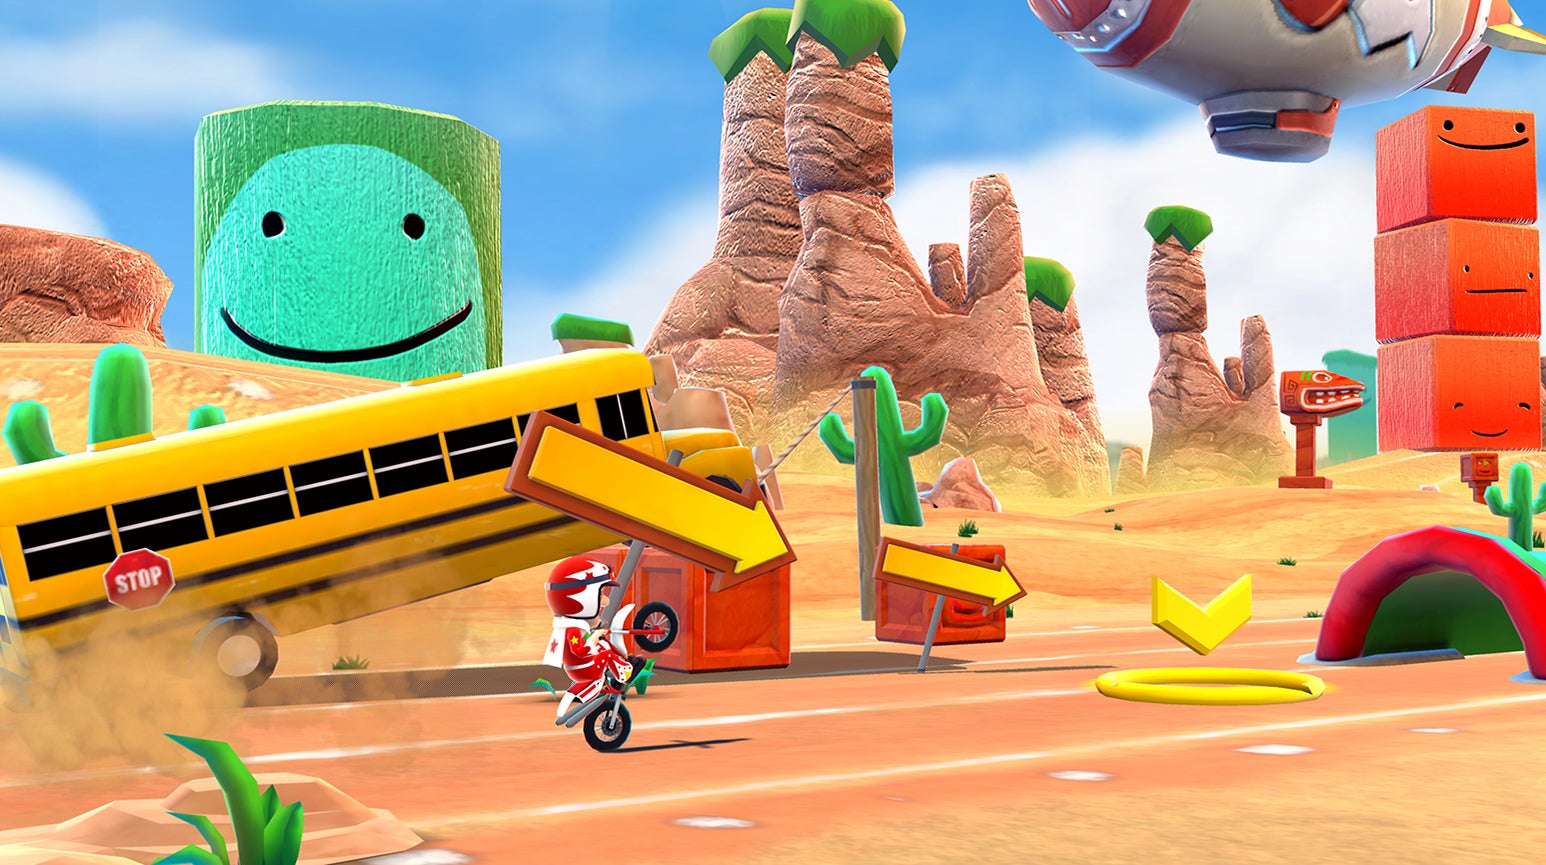 Image for No Man's Sky dev's stunt racer Joe Danger now free to play in browsers